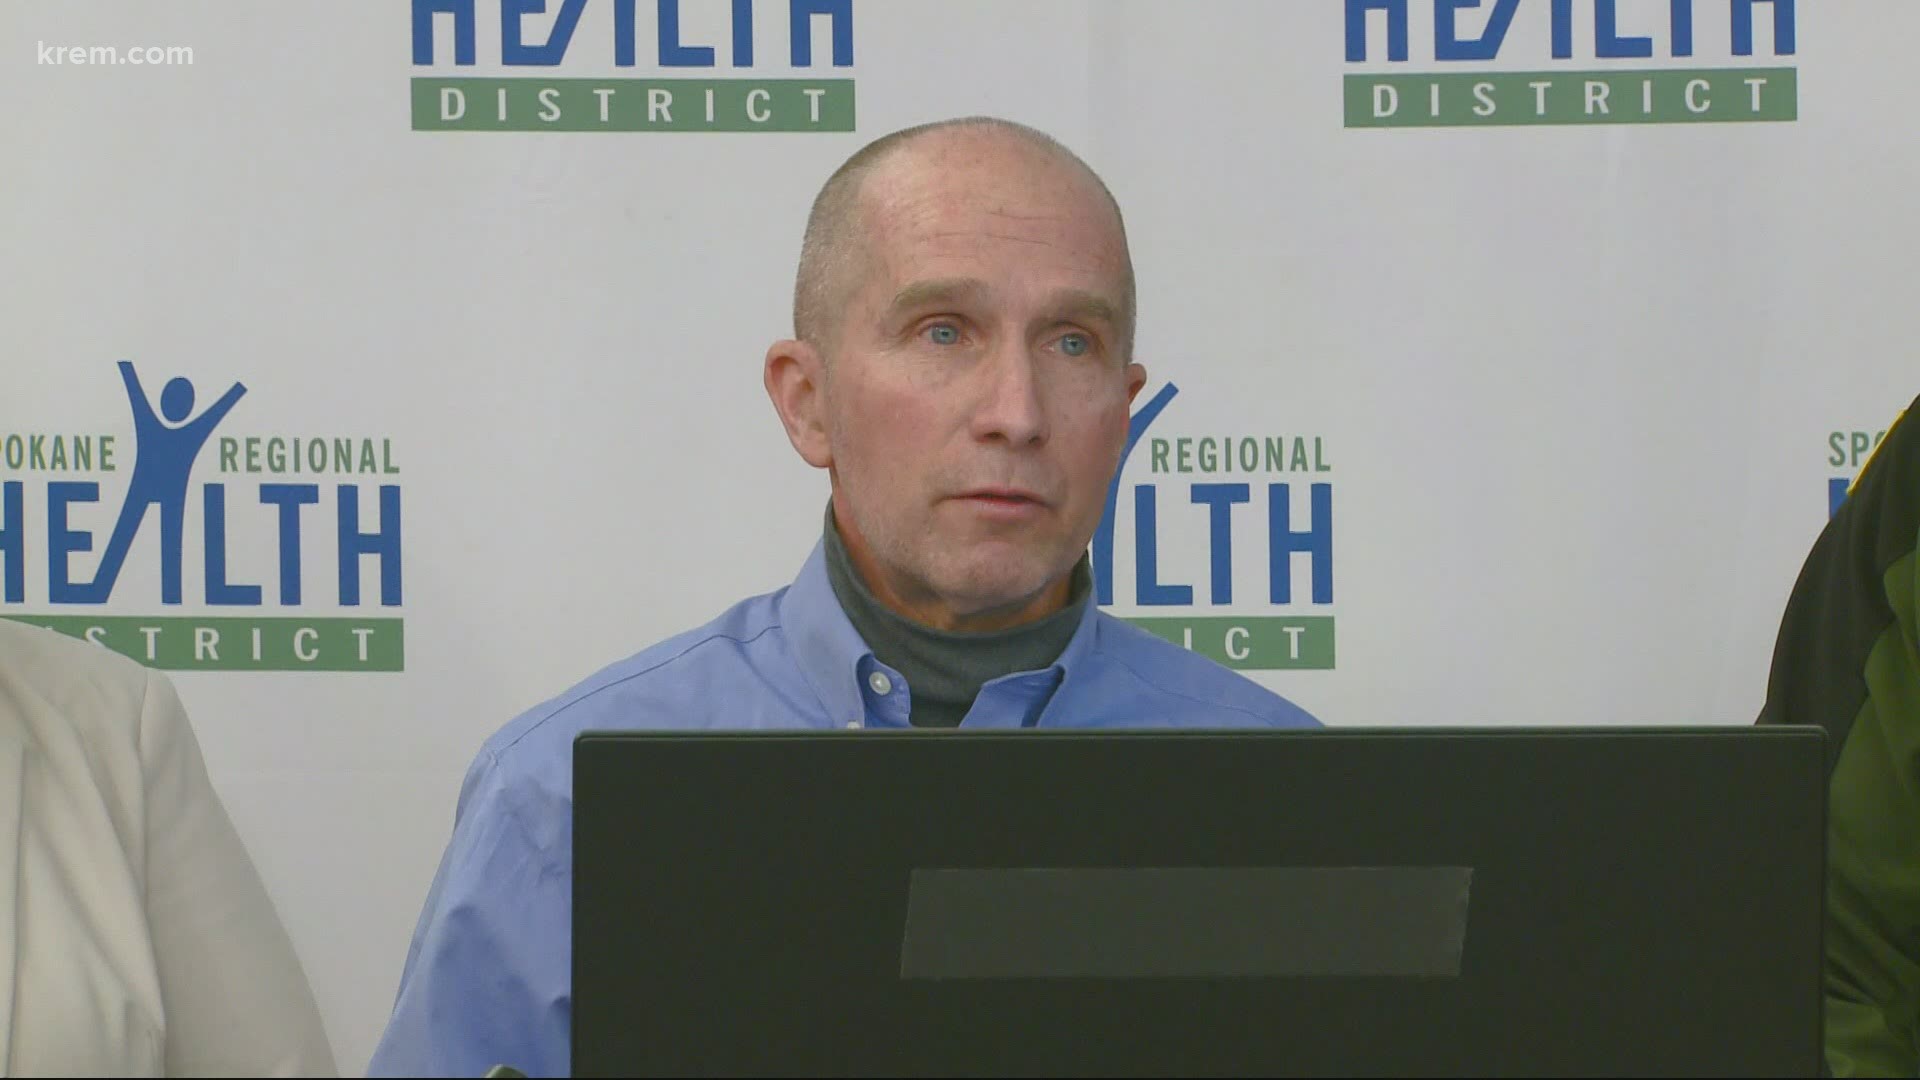 Dr. Bob Lutz is no longer an employee of the Spokane Regional Health District. The board voted to ask Lutz to resign.